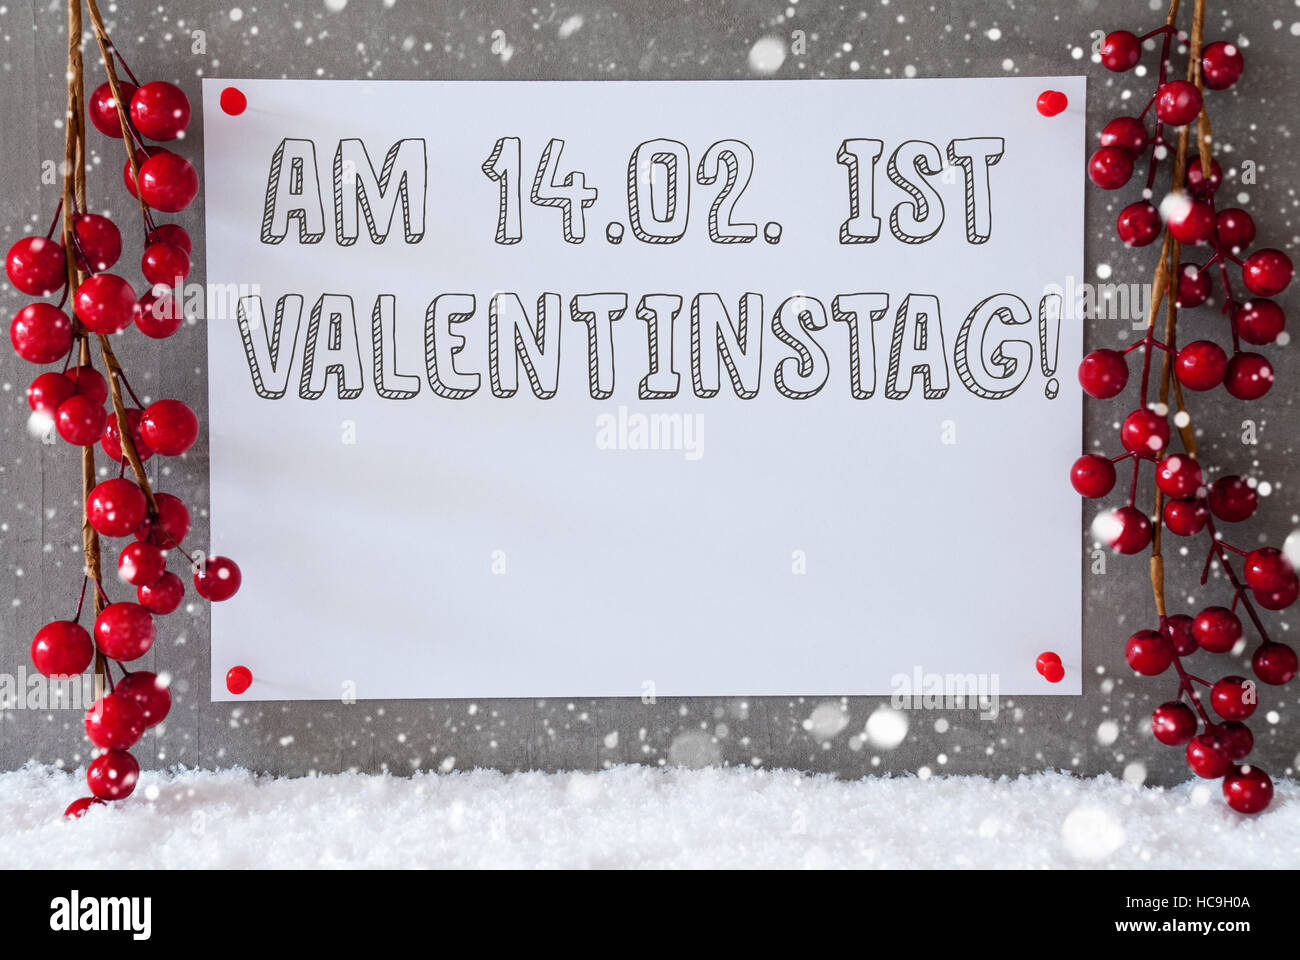 Label, Snowflakes, Decoration, Valentinstag Means Valentines Day Stock Photo